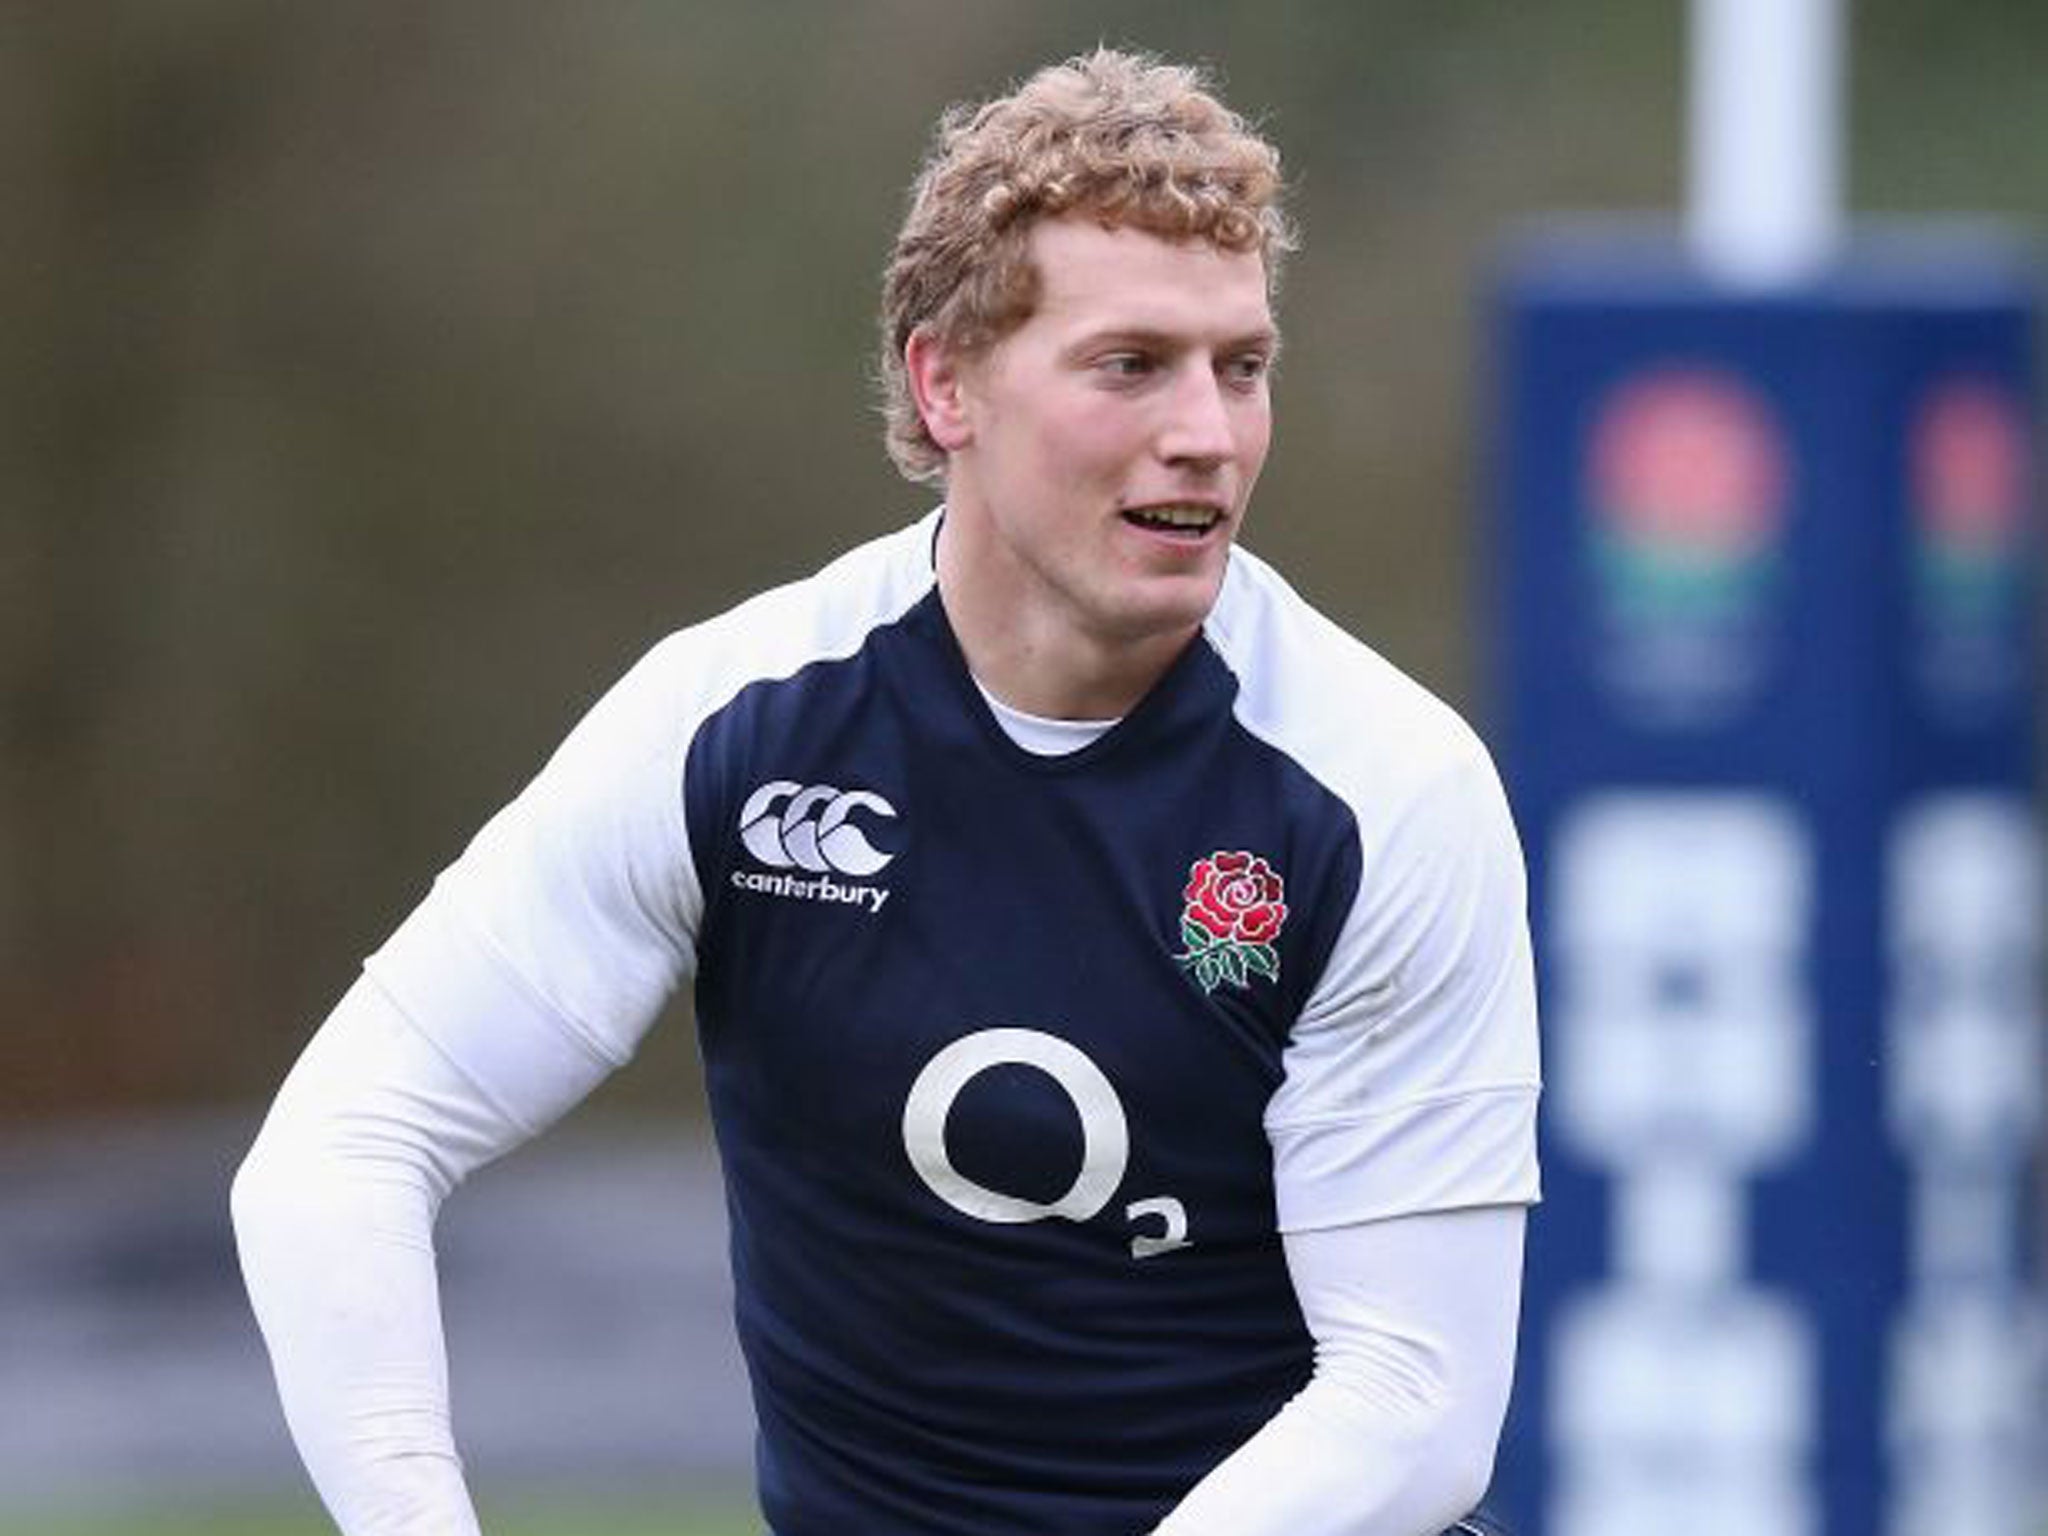 Billy Twelvetrees has all you want to see in a big No 12